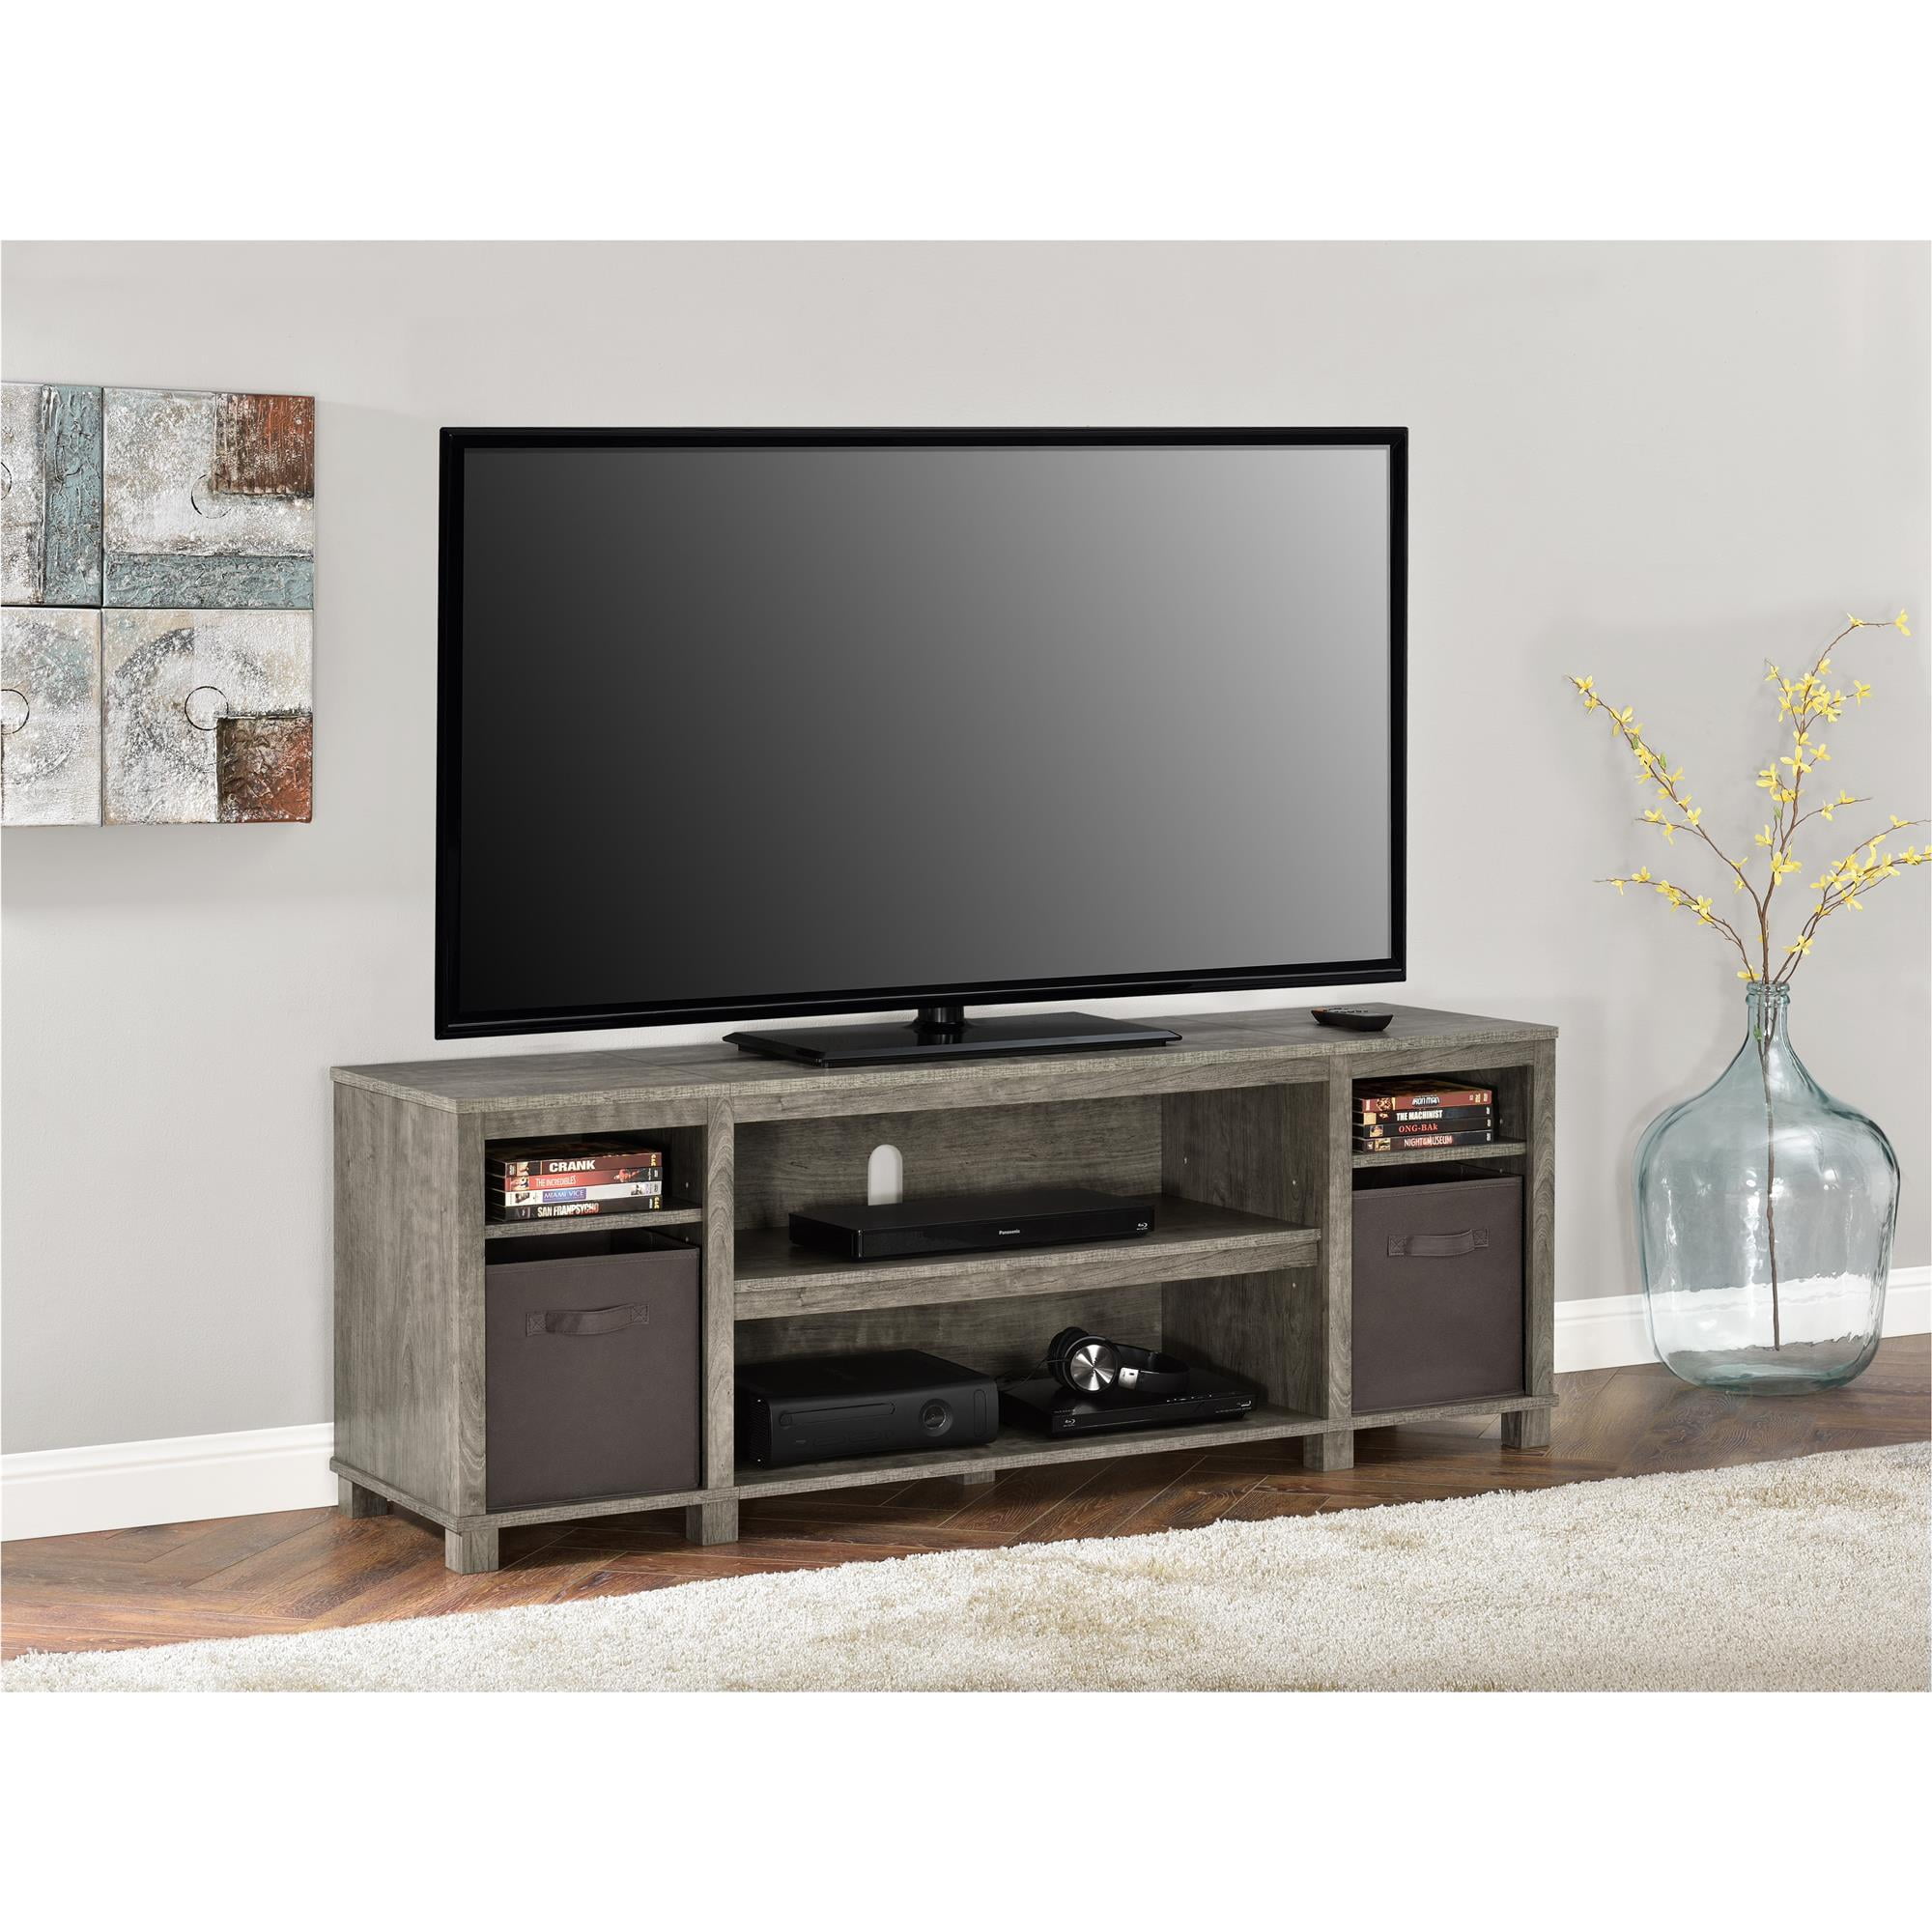 Details about   Mainstays TV Stand for TVs up to 42 Multiple Colors 